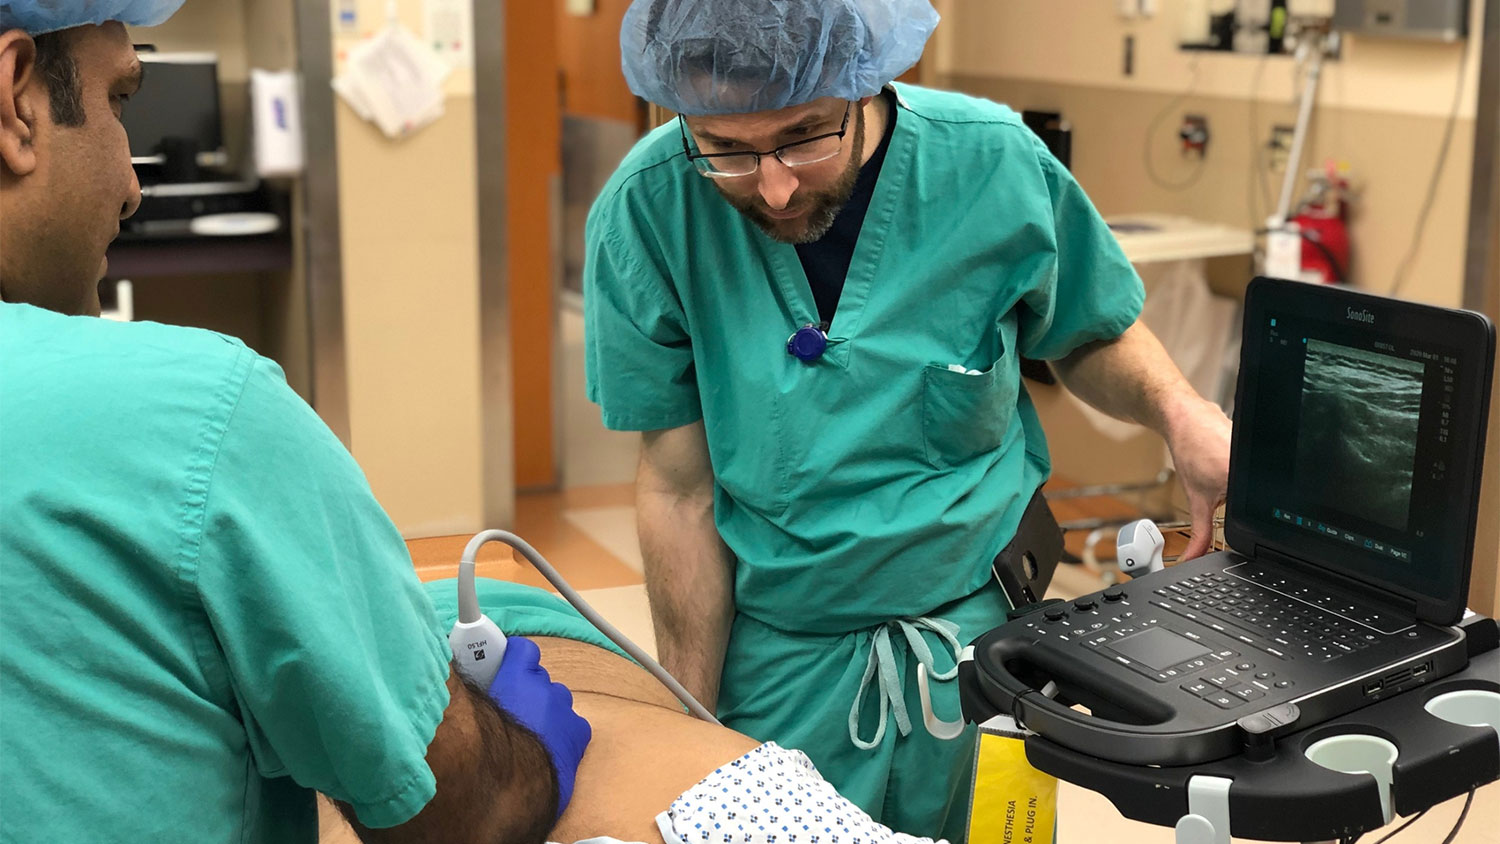 Dr. Gipson in an ultrasound workshop for regional anesthesia